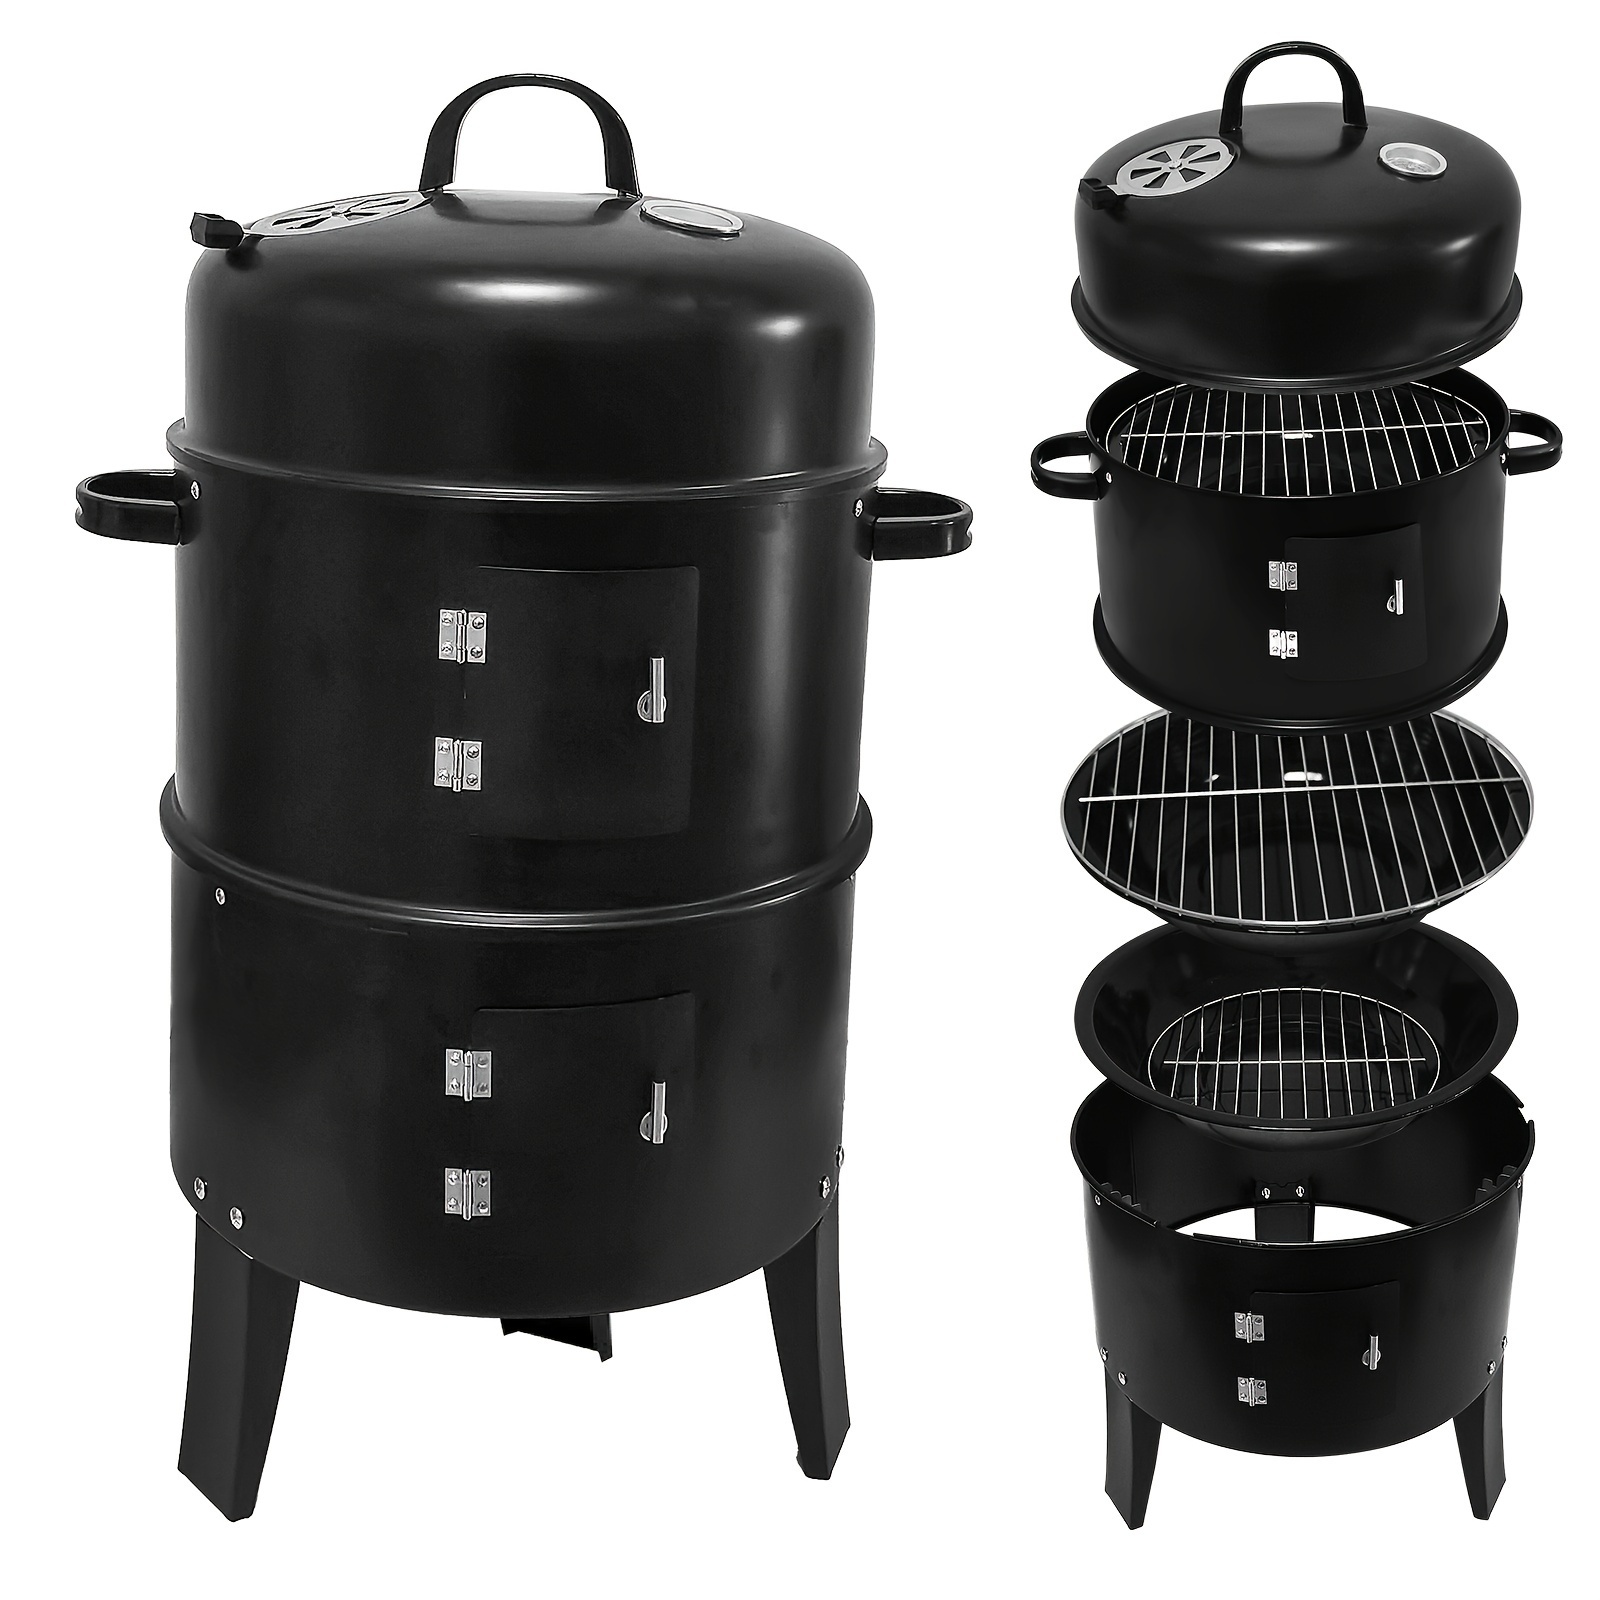 

Charcoal 3-in-1 Outdoor, Portable Charcoal Bbq Grill With Combo, Built-in Thermometer And Air Vent, 2 Layers Vertical Steel Charcoal For Outdoor Cooking Camping, Black